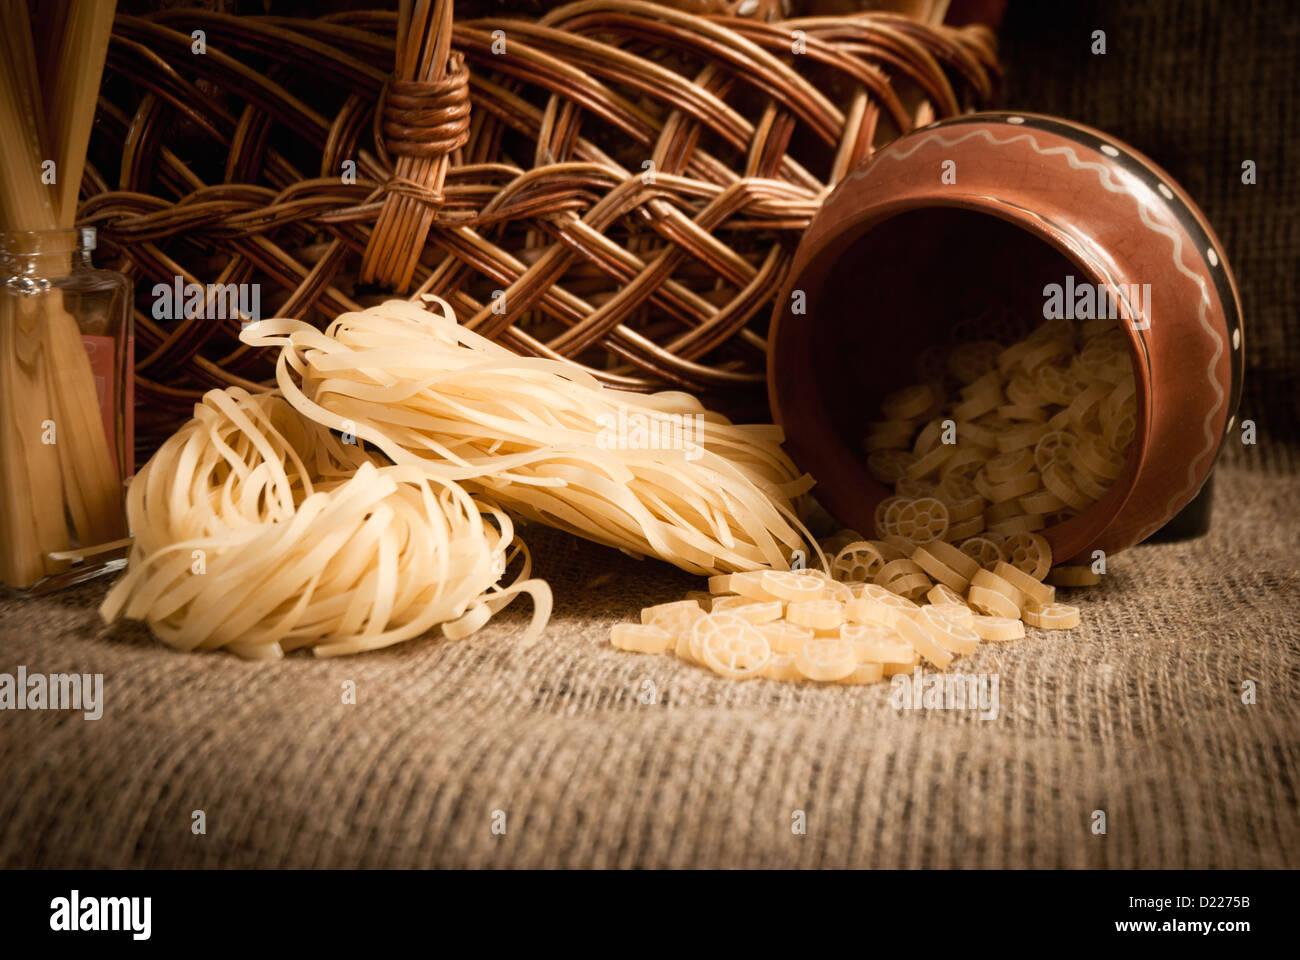 healthy meal with bread and cereals Stock Photo